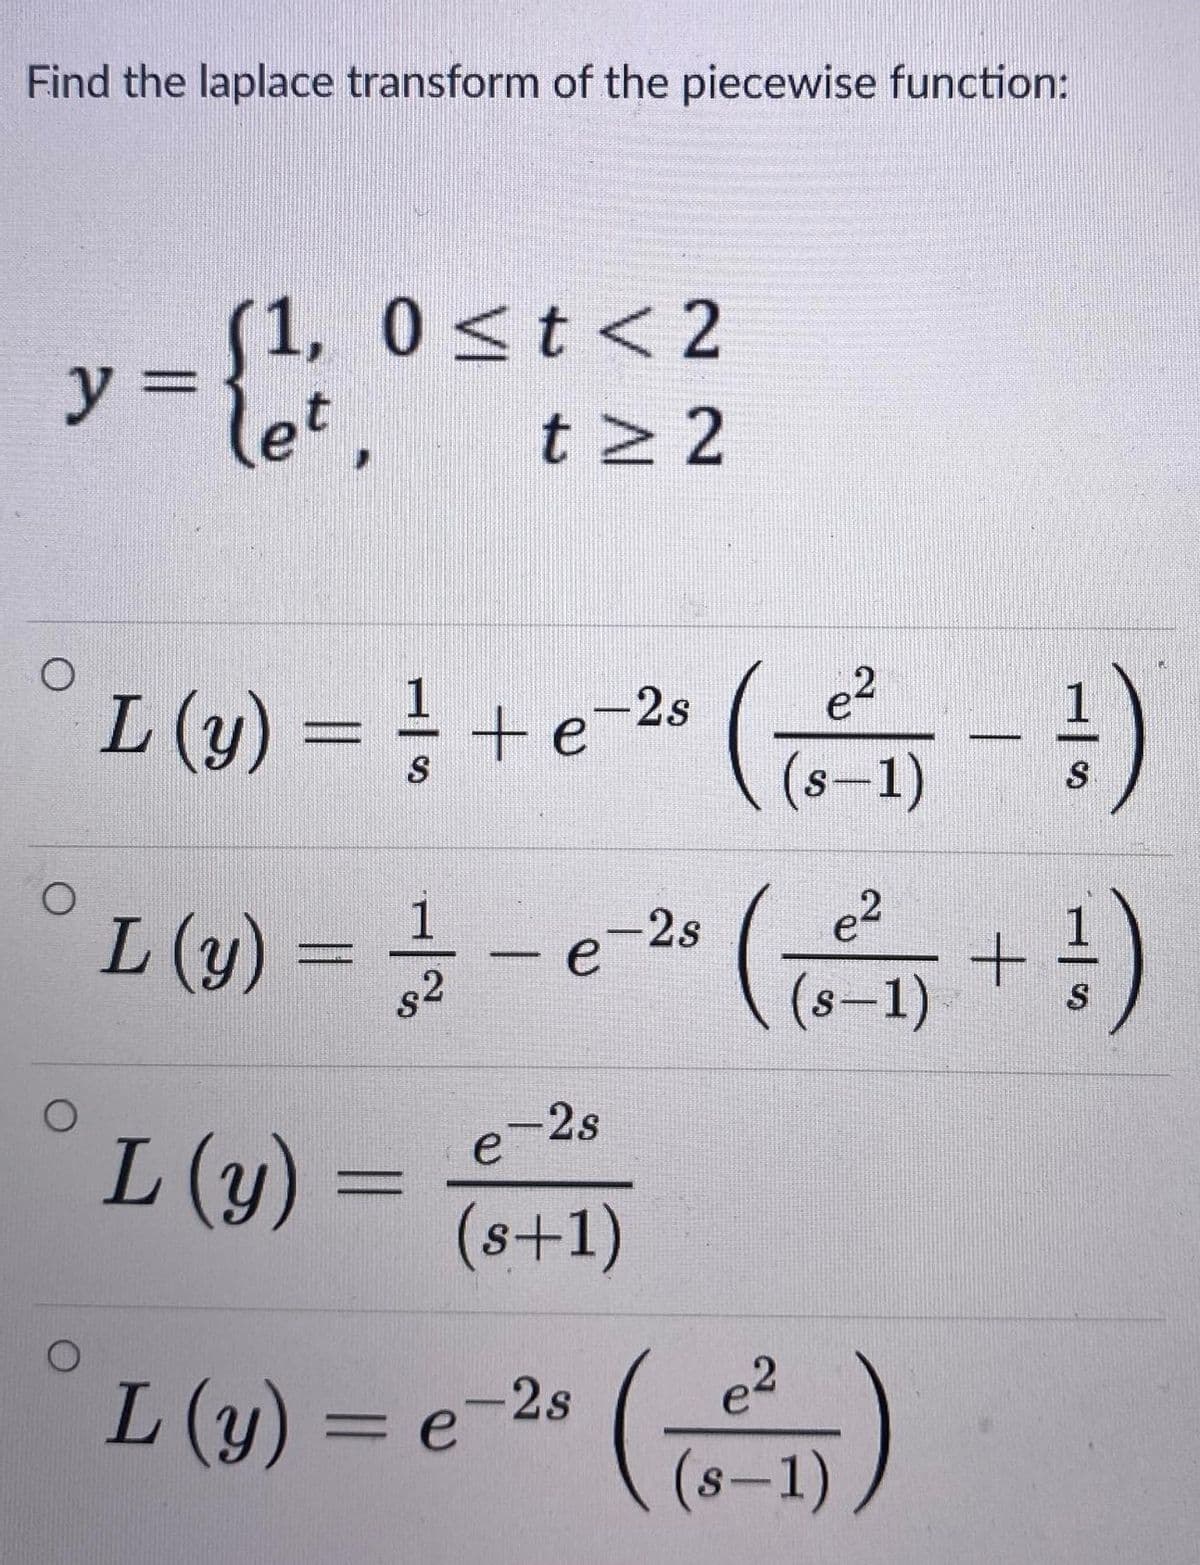 Find the laplace transform of the piecewise function:
(1, 0<t <2
y%3D
let,
t 2
°L (1) = } + e-2« ( )
te-28
(s-1)
S
°L (1) = -e " (+)
-2s
82
(s-1)
-2s
e
L (y) =
(s+1)
L(y) = e-2s
= e-2* ()
(s-1)
